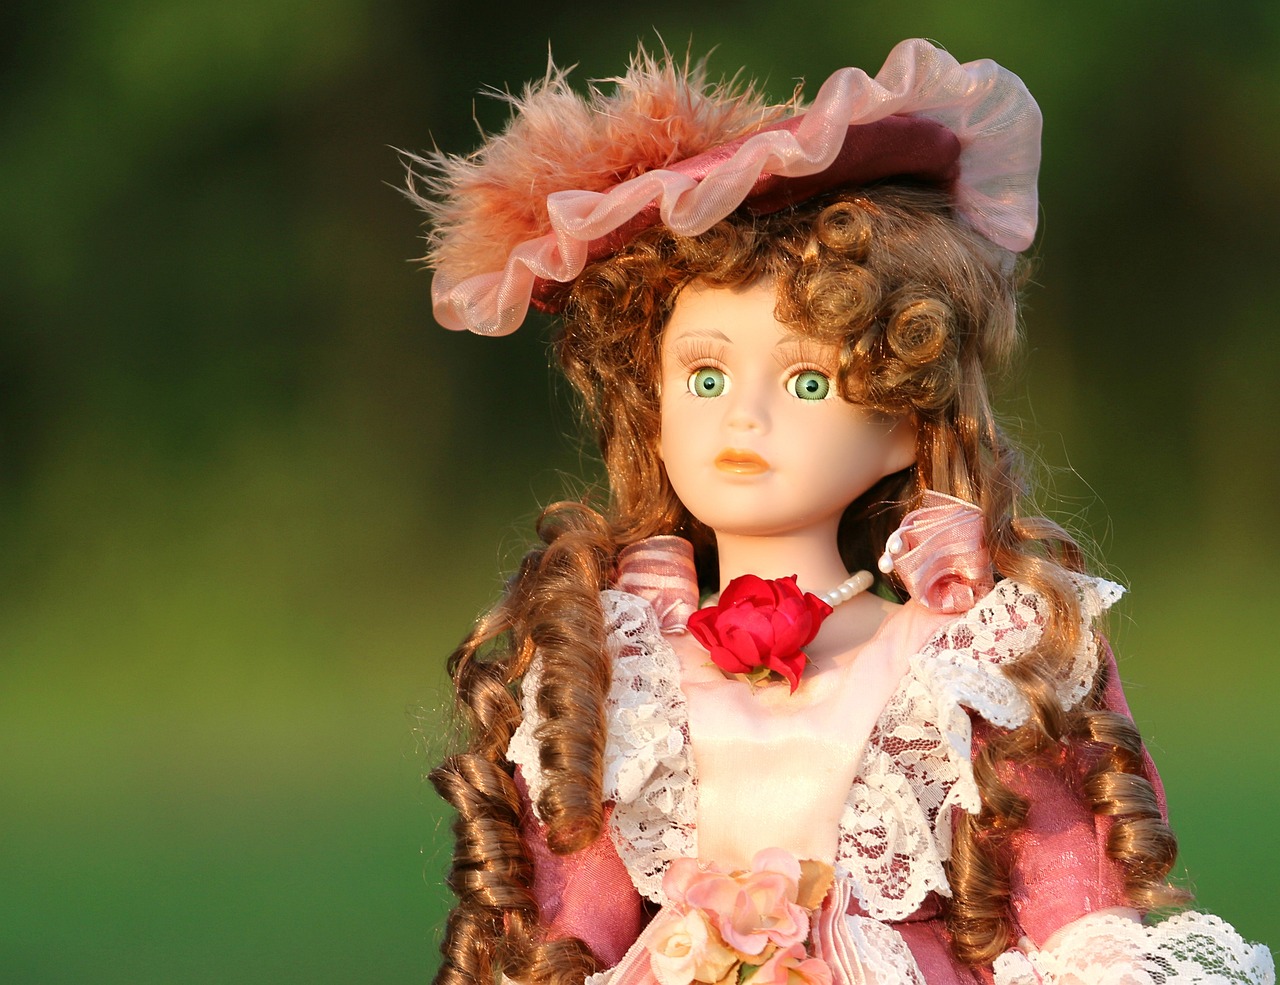 a close up of a doll wearing a dress, inspired by Margaret Brundage, trending on pixabay, rococo, evening sunset, pink iconic character, young southern woman, porcelain